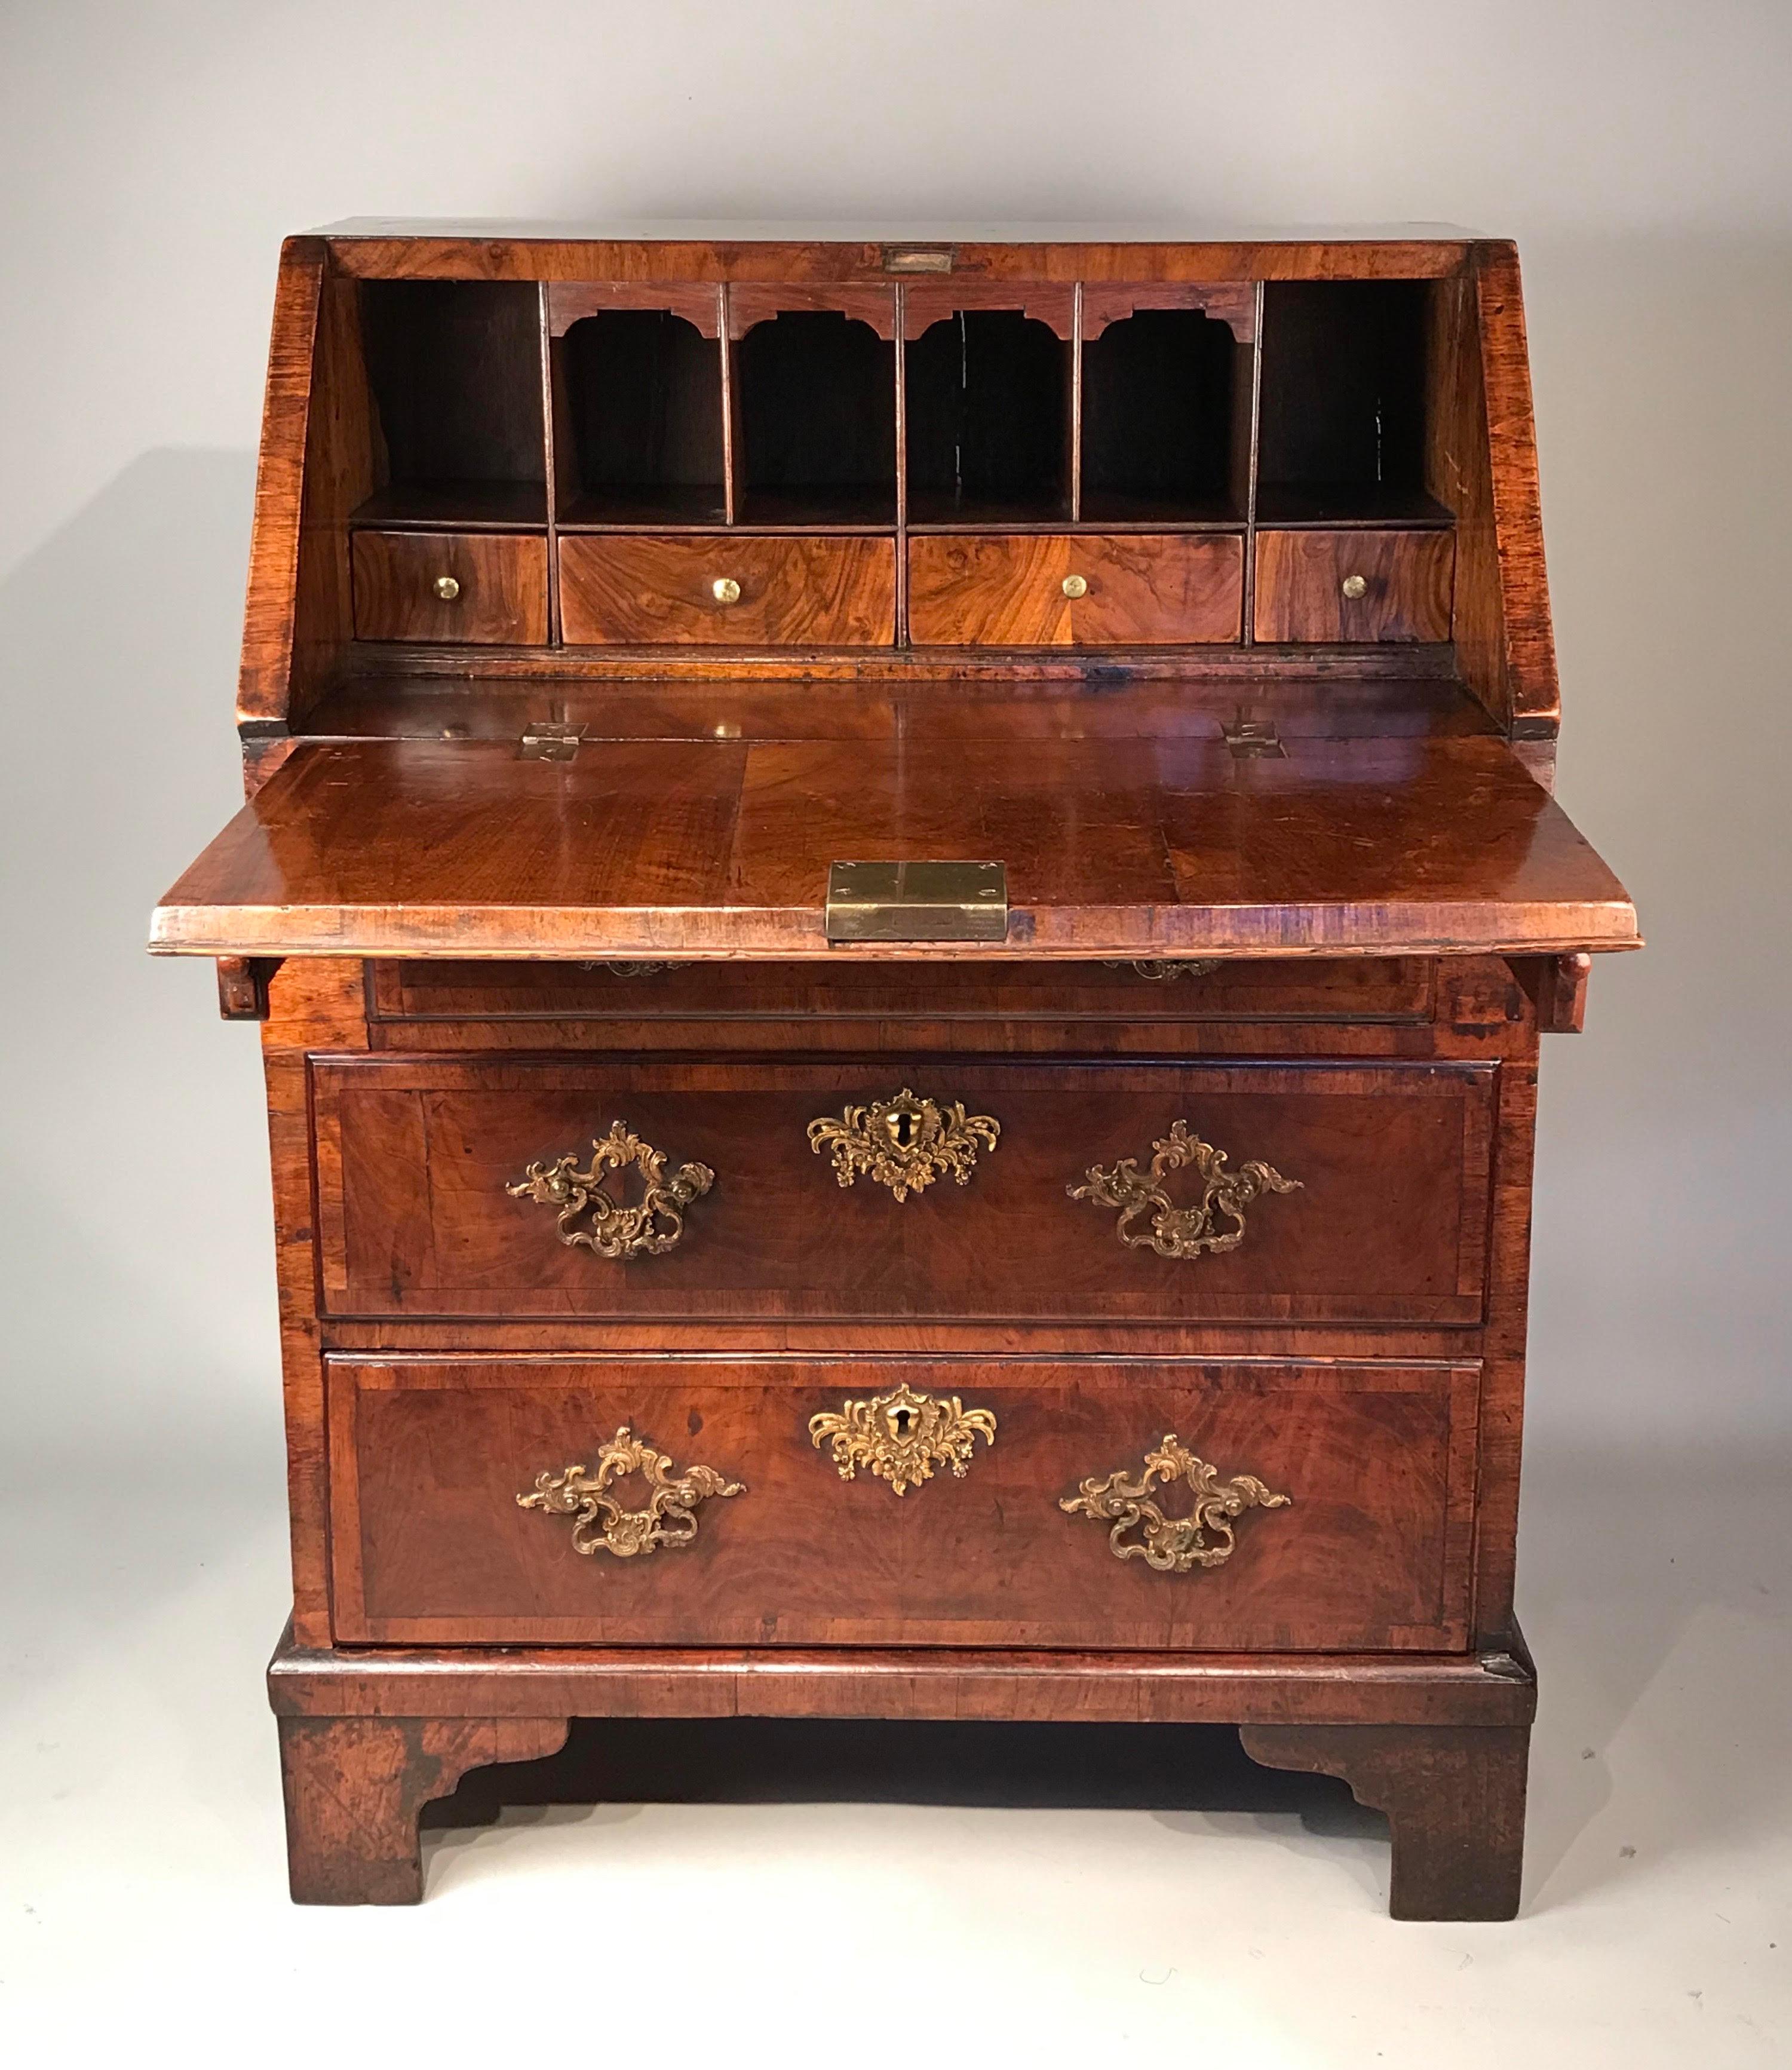 A rare antique English walnut bureau of compact proportions. Mid-18th century, circa 1740.

Measures: W 2’3''
D 17''
H 36''

BHA 1106

Nb. This rare small size George ll period (1683-1760) walnut bureau remarkably survives in its original